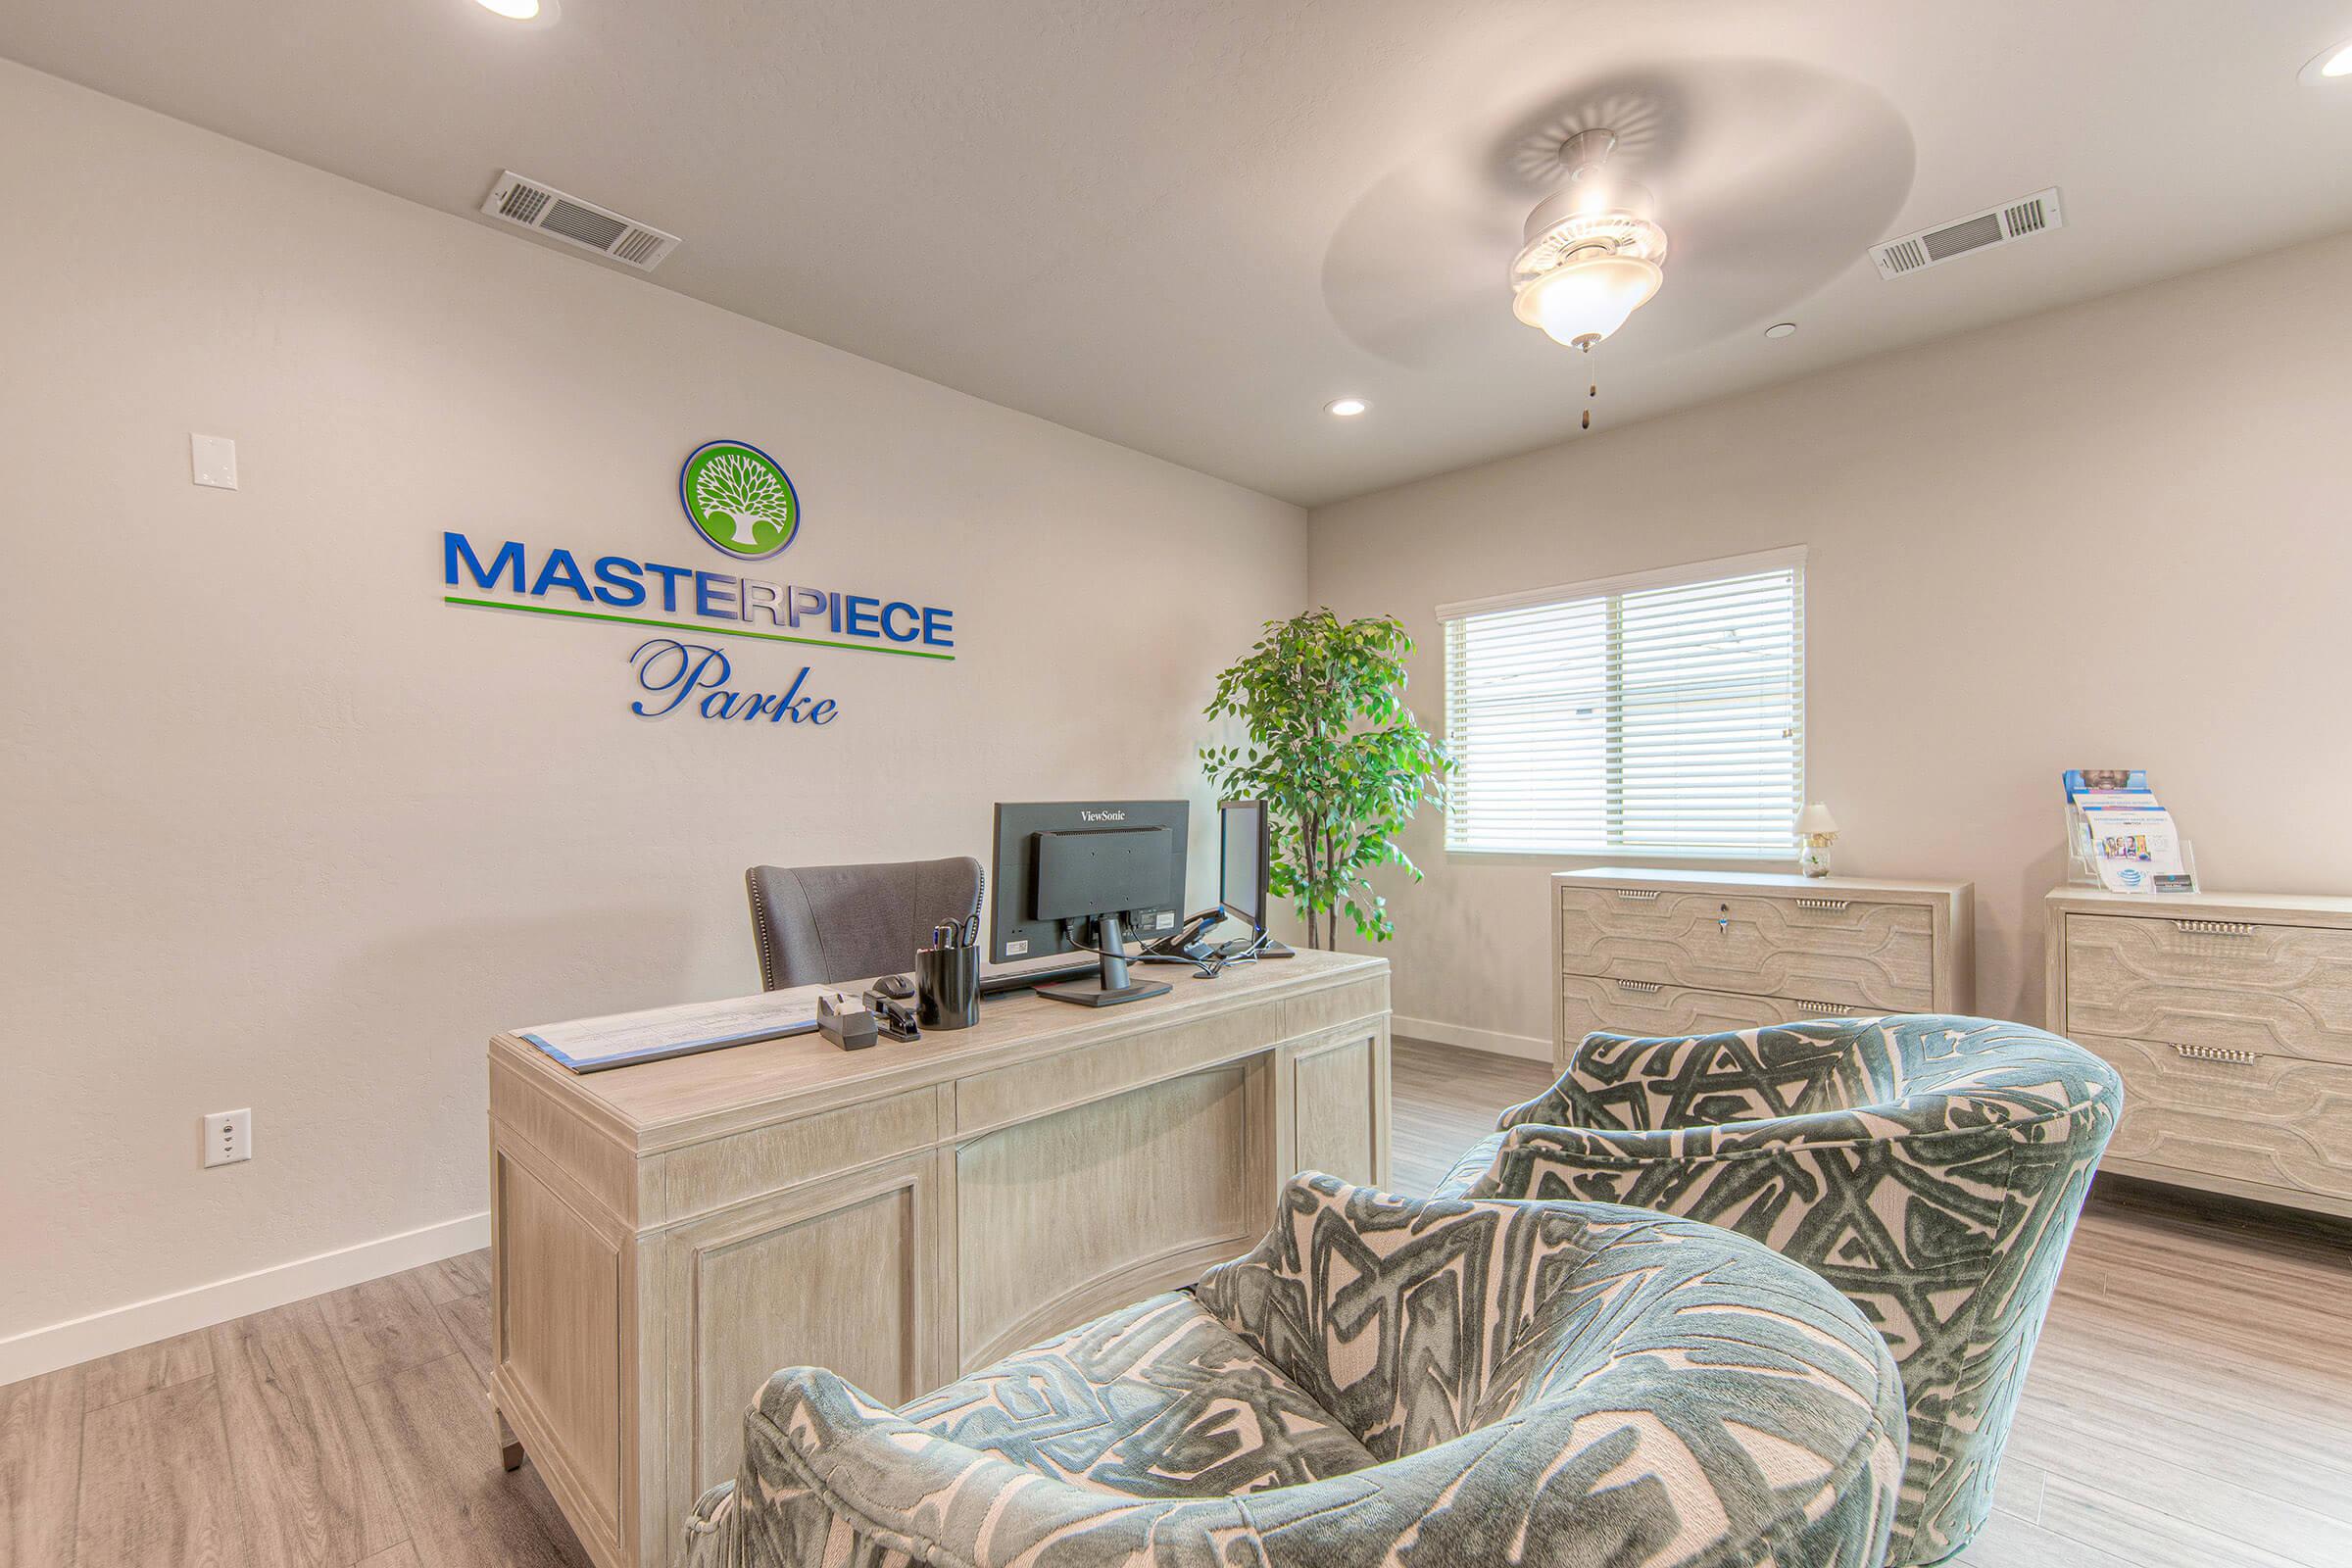 Masterpiece Parke leasing office with green chairs